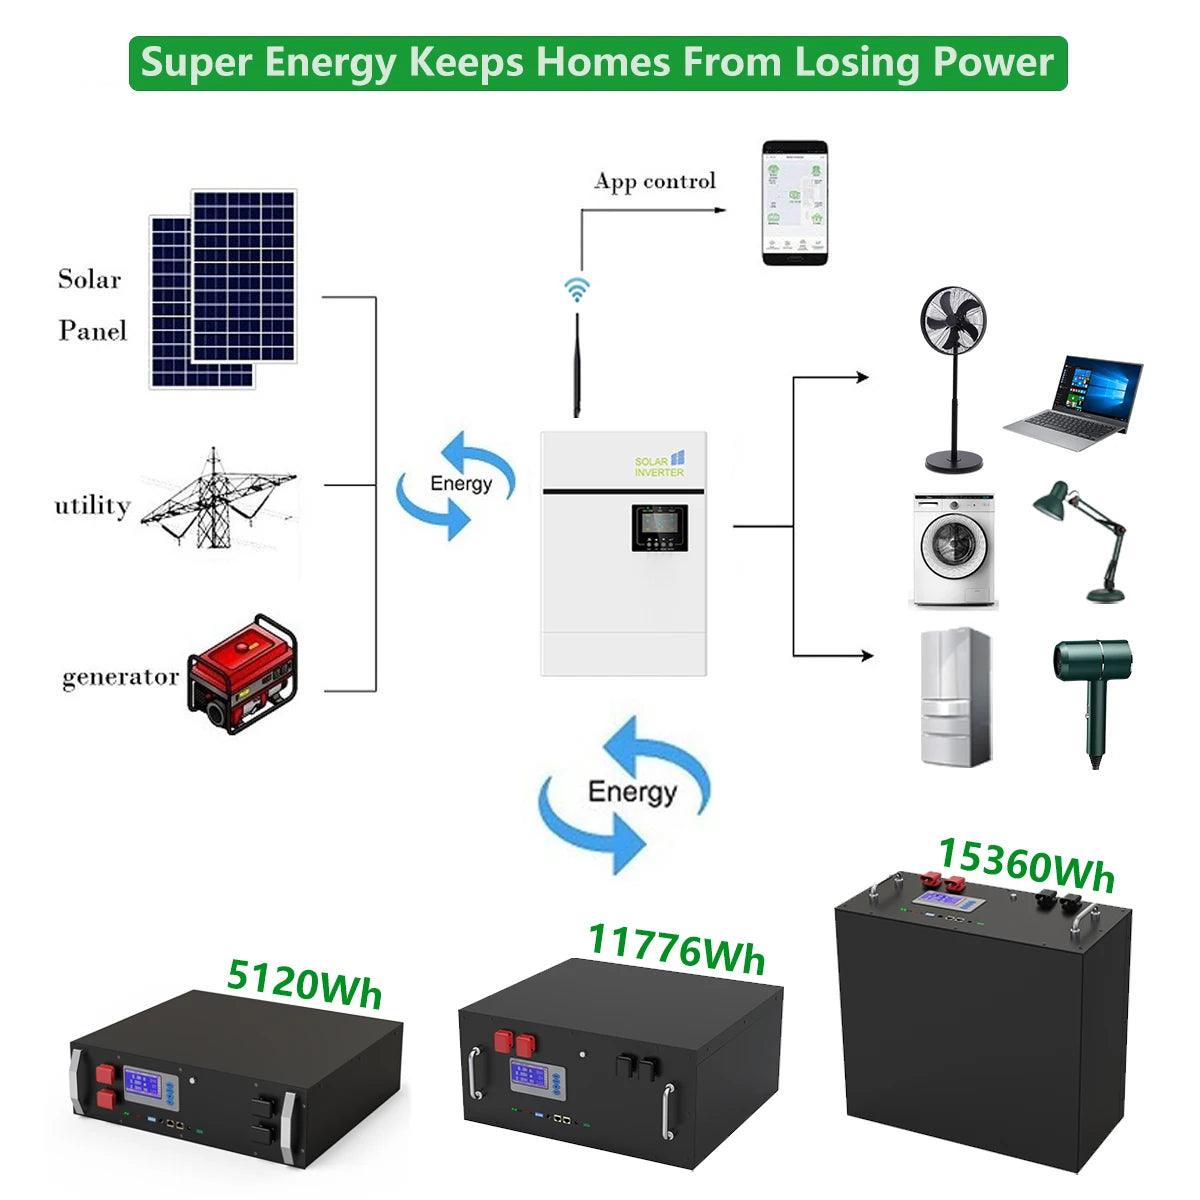 LiFePO4 48V 120Ah Battery, Reliable solar-powered energy storage system for homes, providing backup power with up to 15.36kWh capacity.